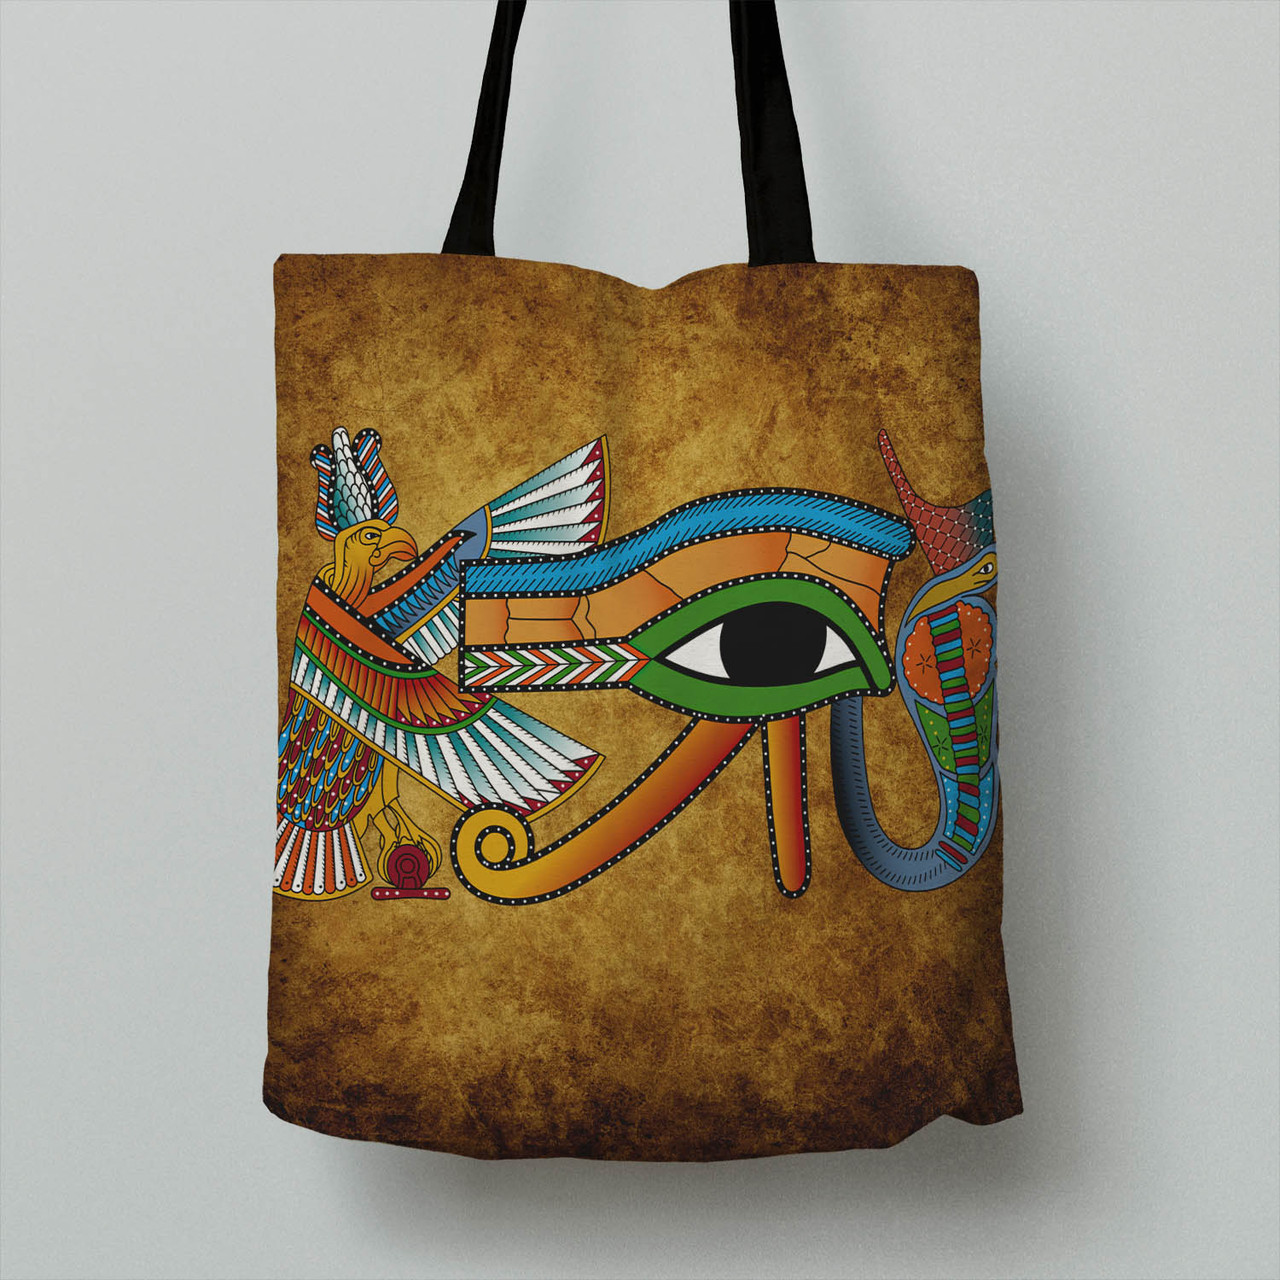 Egyptian Tote Bag - African Patterns Egyptian Hieroglyphics and Gods Self Knowledge Tote Bag